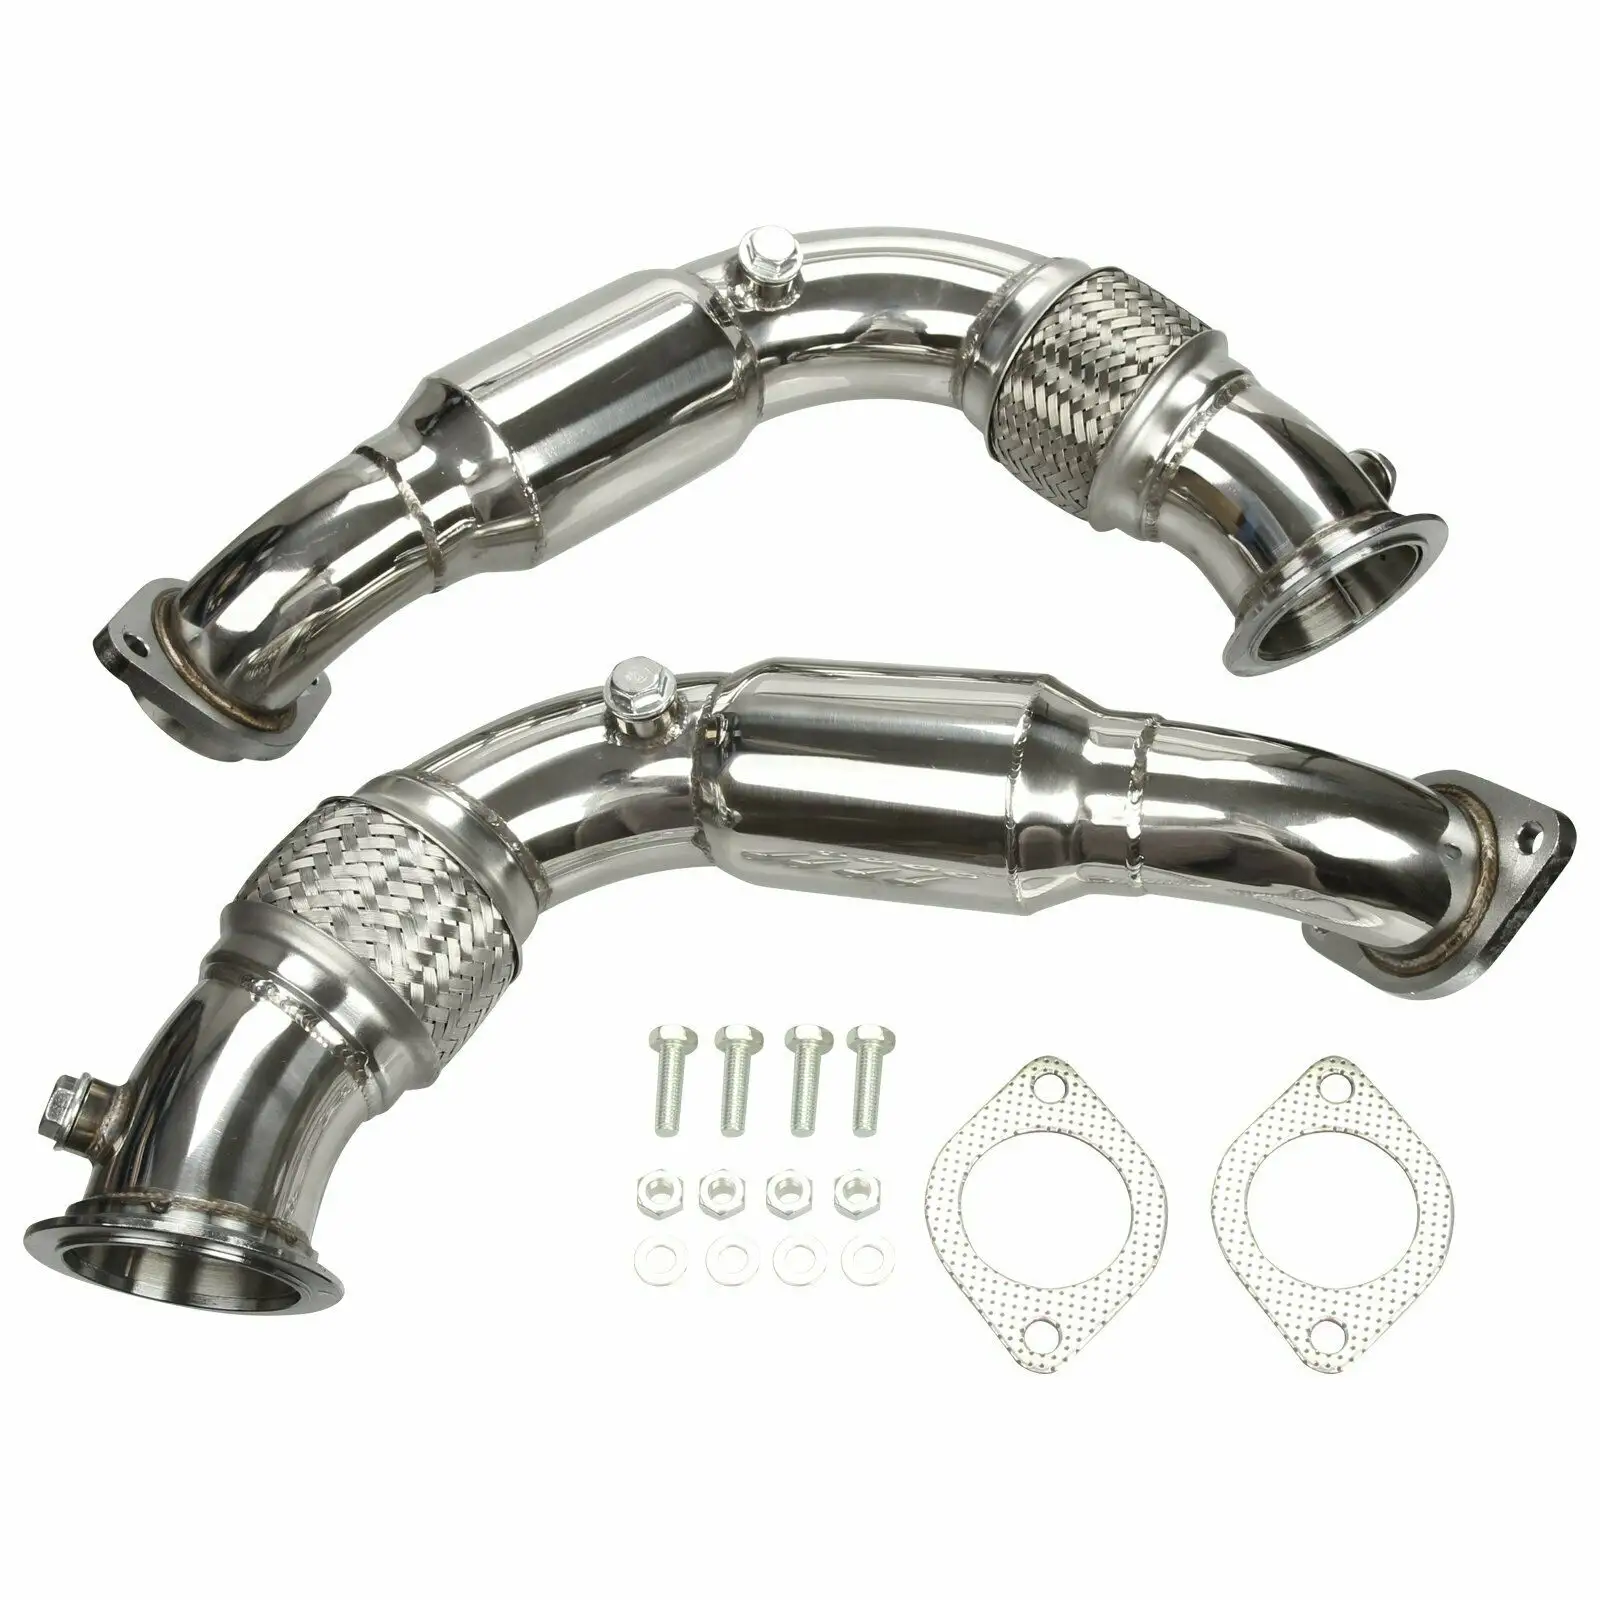 Exhaust Catless Turbo Exhaust Pipe Twin Downpipe For BMW X6/X5/5-/7-SERIES N63B44 4.4 V8 Stainless Steel